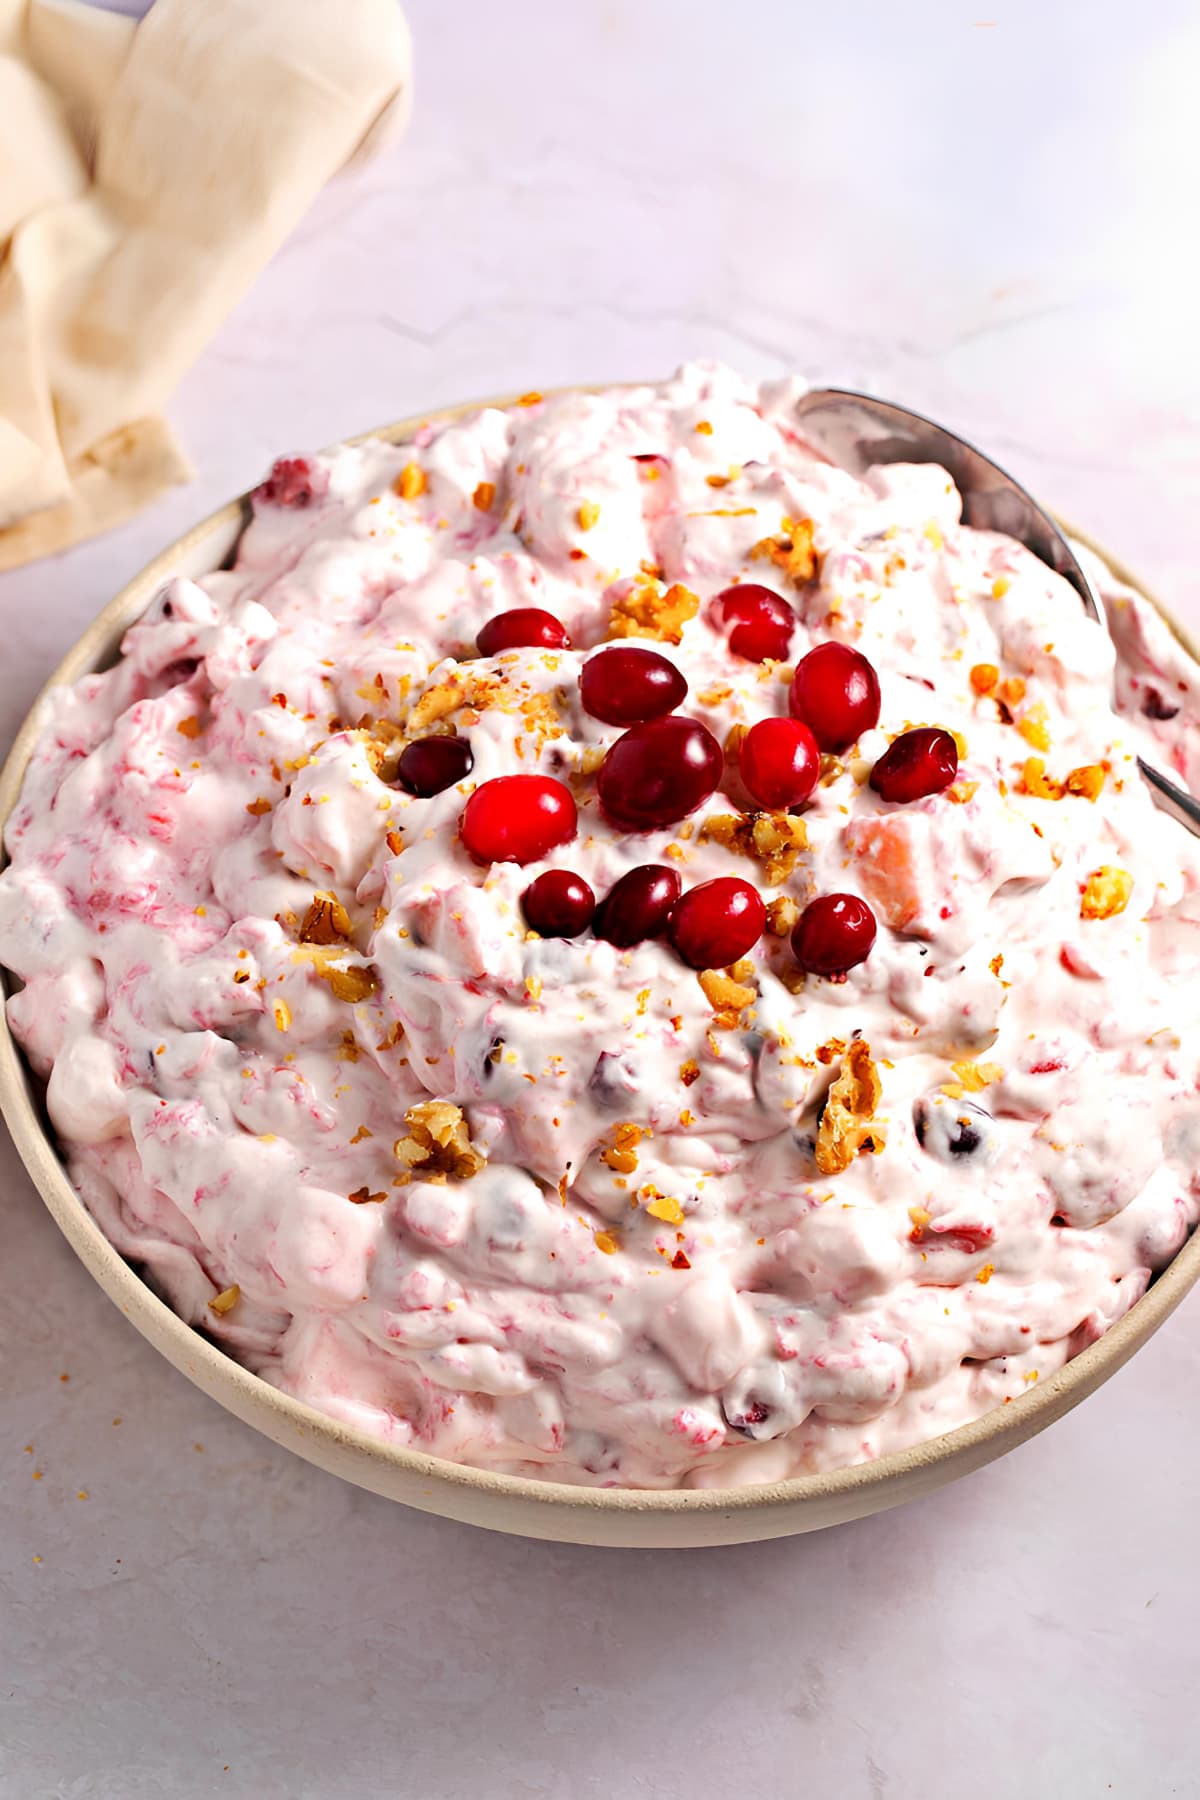 Bowl of creamy salad with fresh cranberries